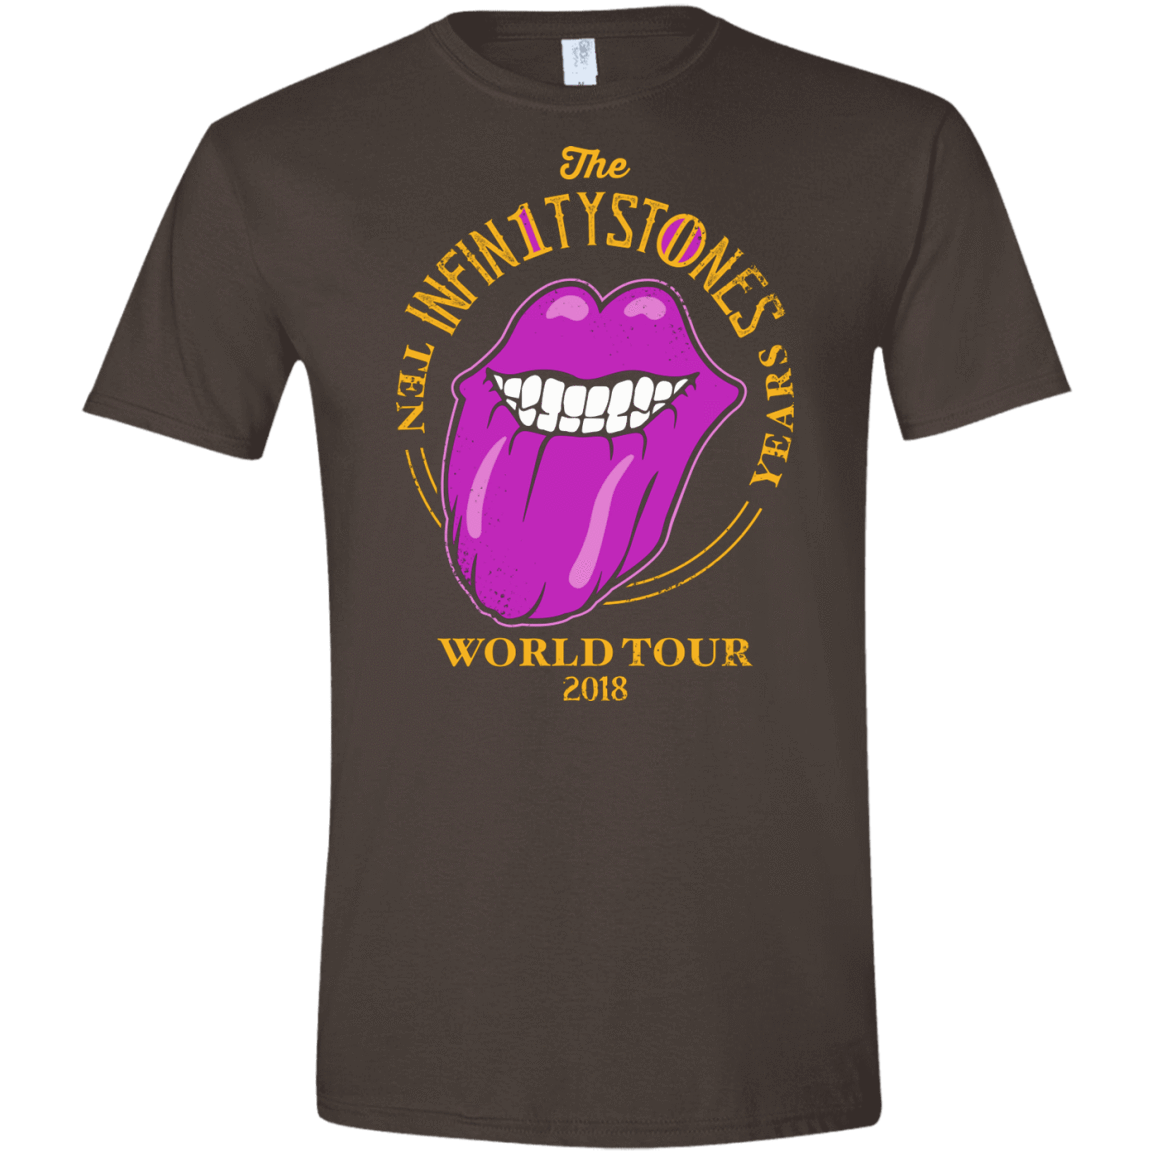 T-Shirts Dark Chocolate / S Stones World Tour Men's Semi-Fitted Softstyle